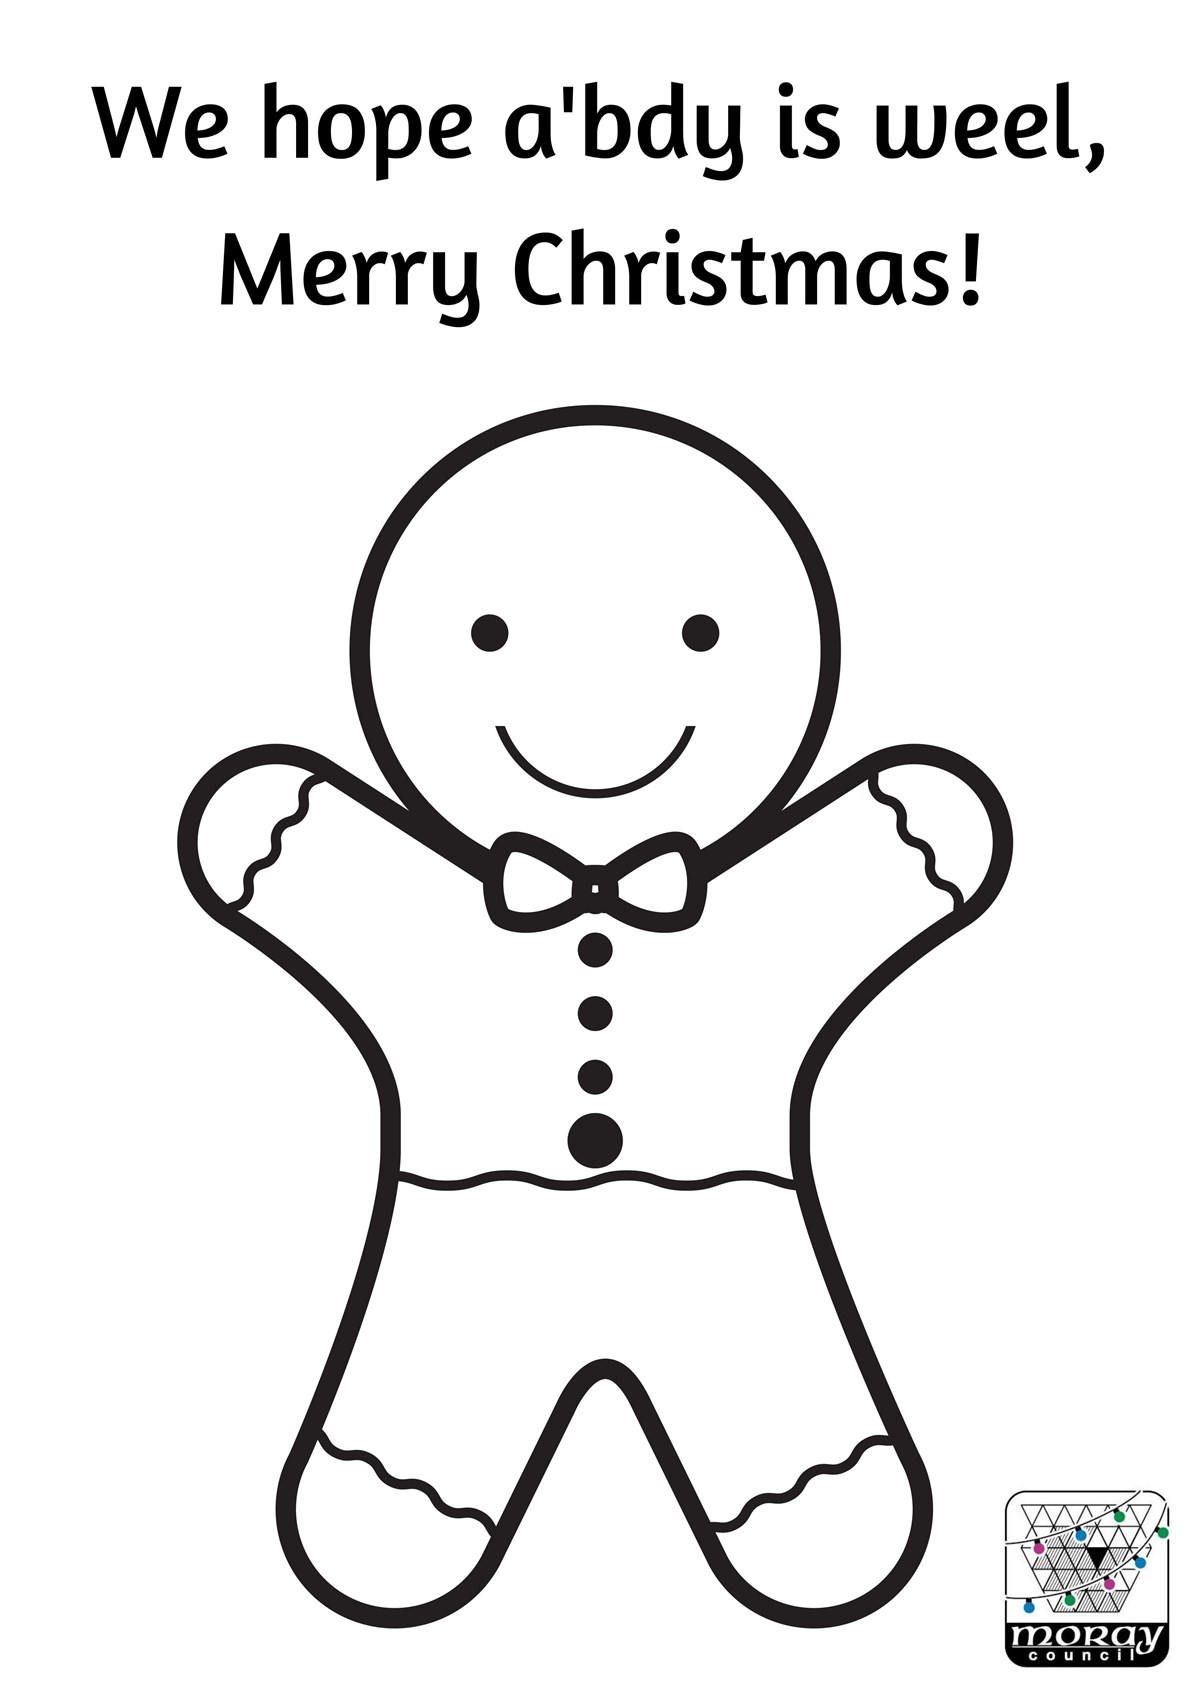 We hope a'bdy is weel gingerbread man colour me in template